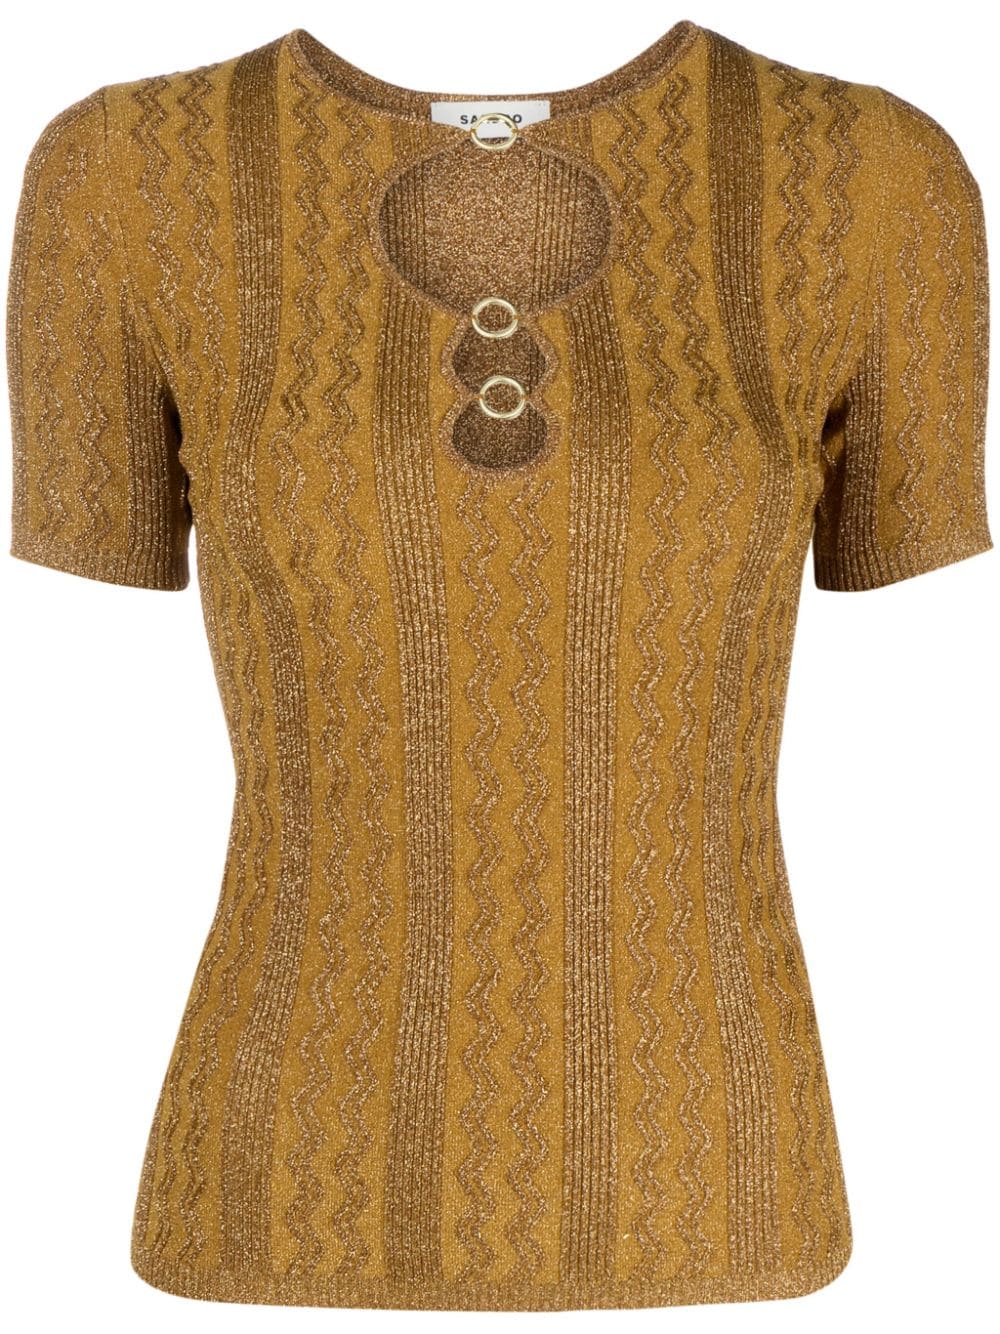 SANDRO cut-out knitted top - Brown von SANDRO